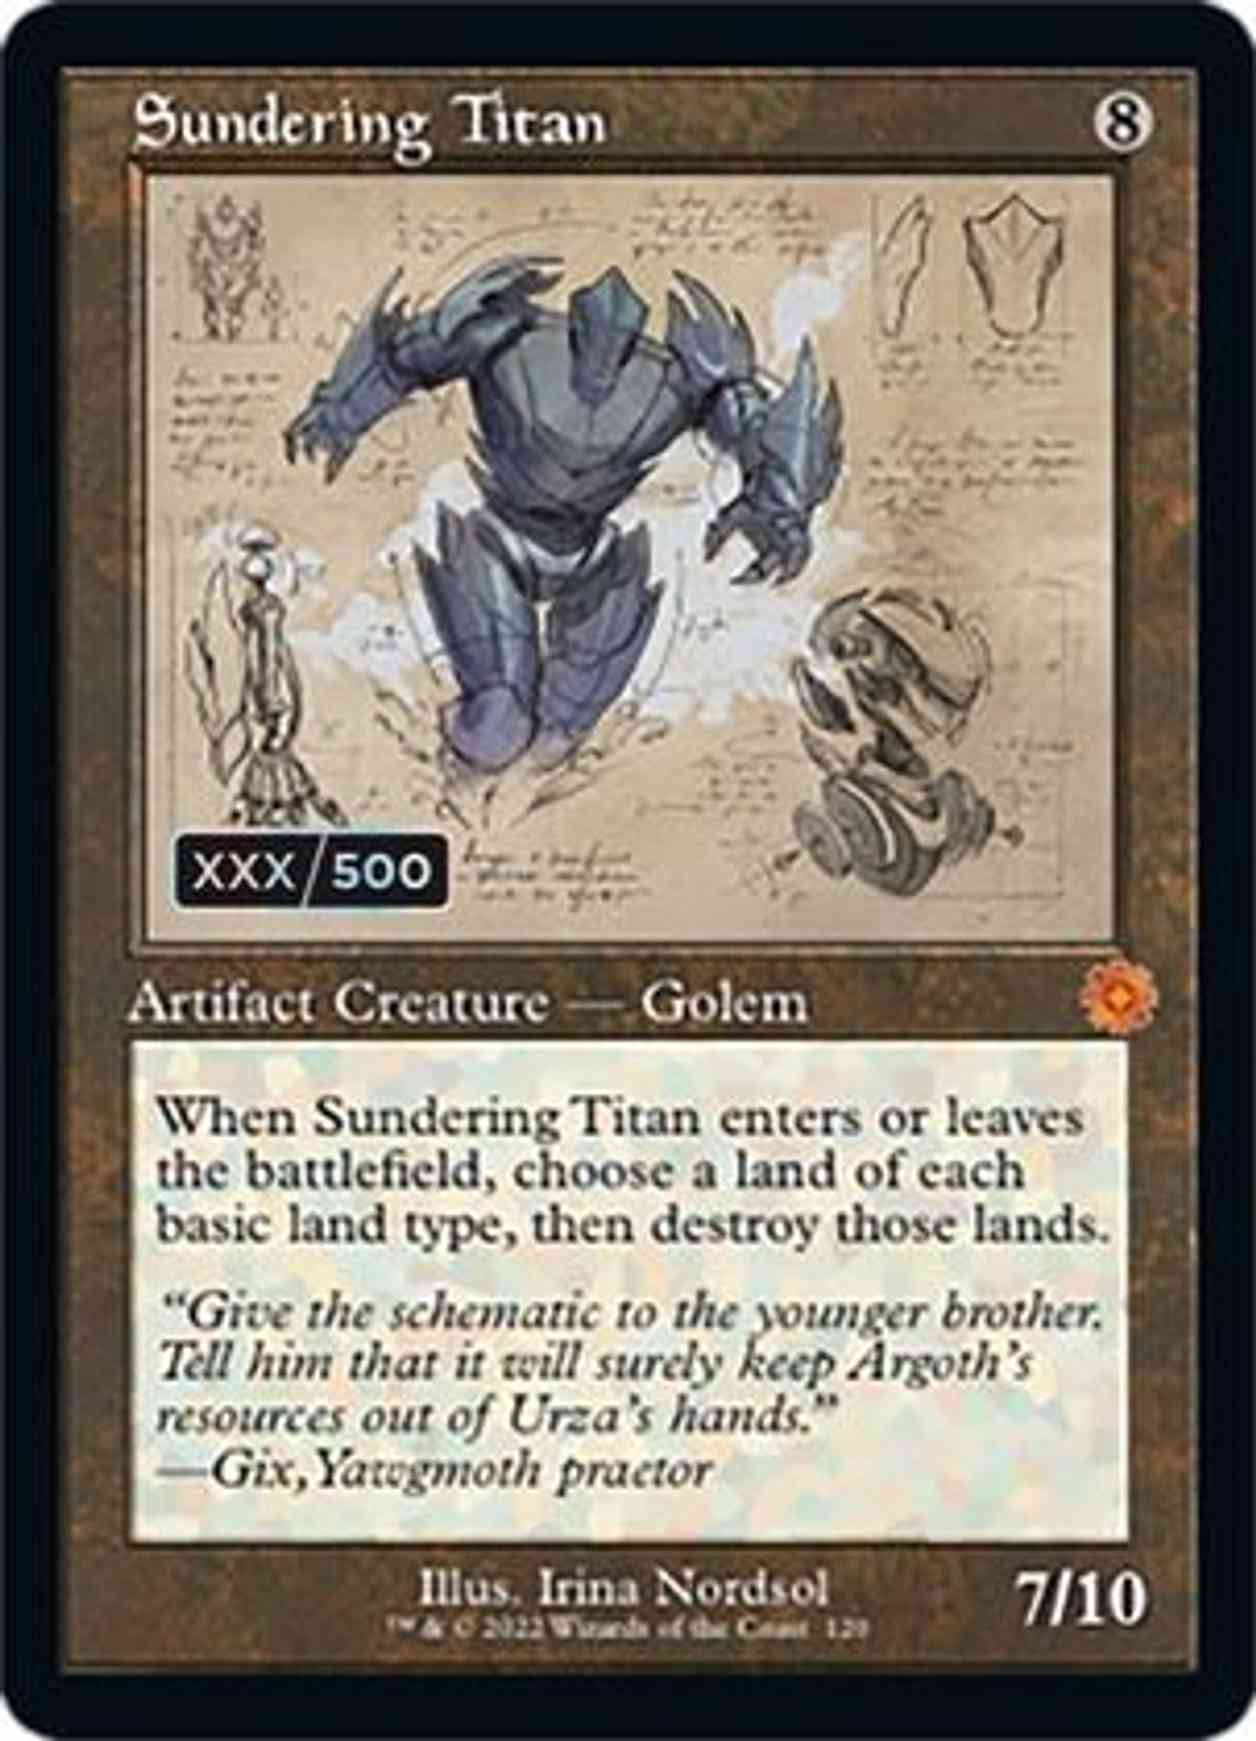 Sundering Titan (Schematic) (Serial Numbered) magic card front